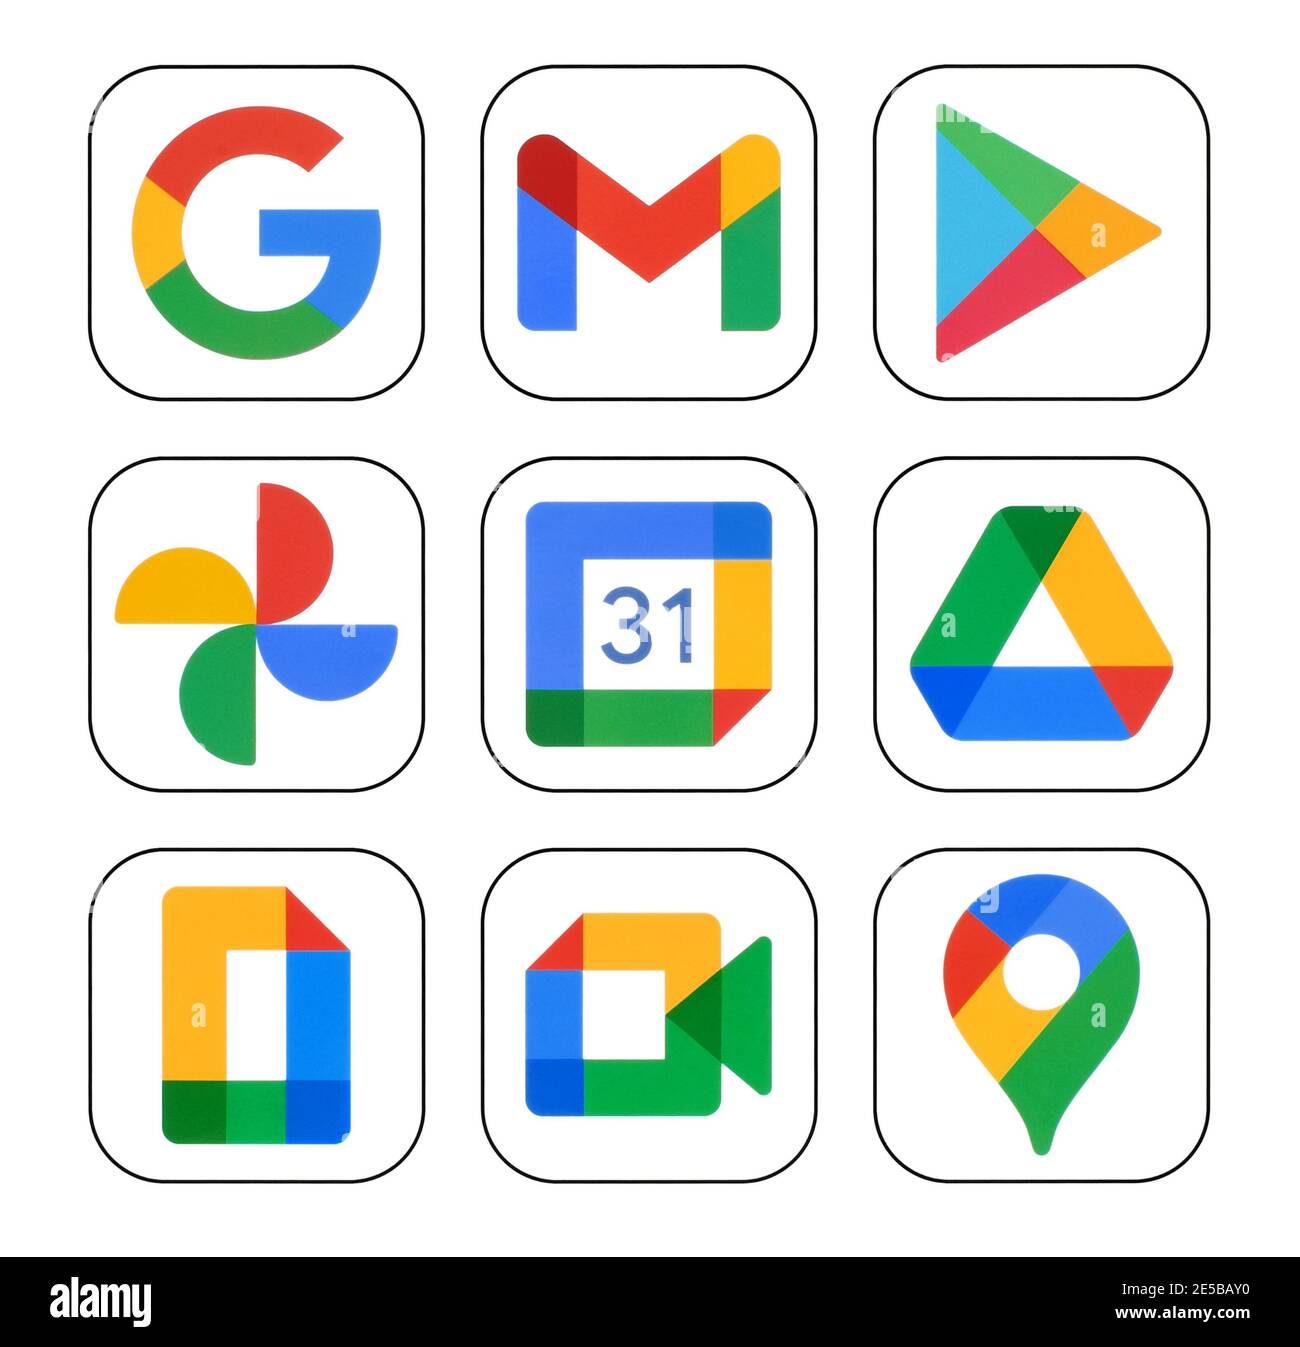 Kiev, Ukraine - January 12, 2021: Icons set of Google services: Google Search, Gmail, Play Store, Photos, Calendar, Drive, and Duo, printed on white p Stock Photo